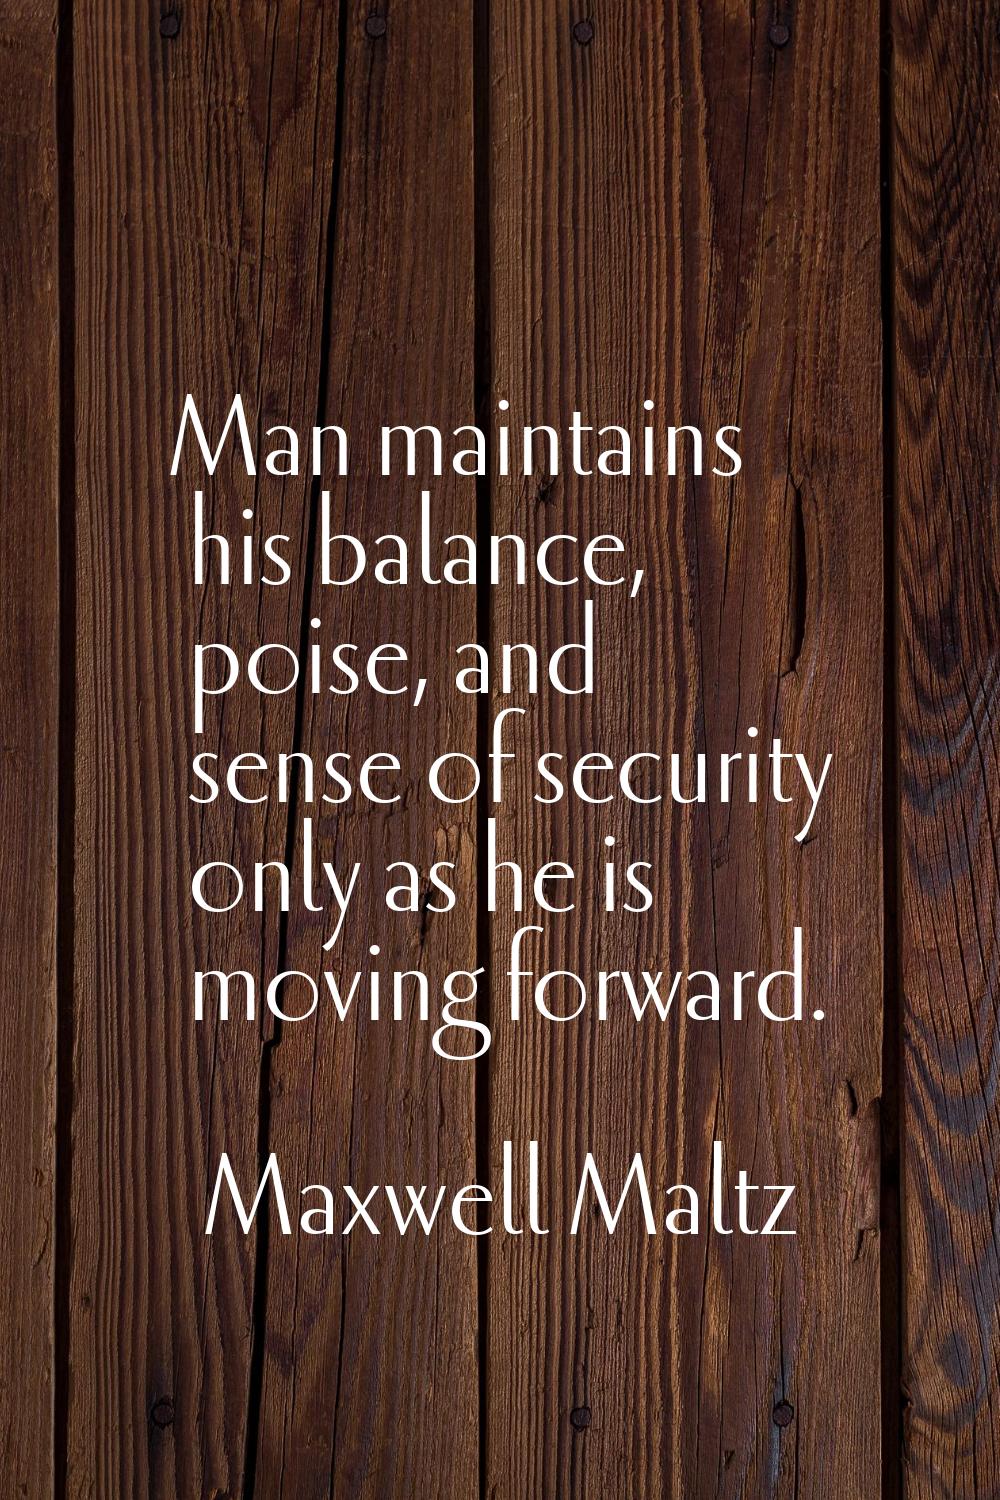 Man maintains his balance, poise, and sense of security only as he is moving forward.